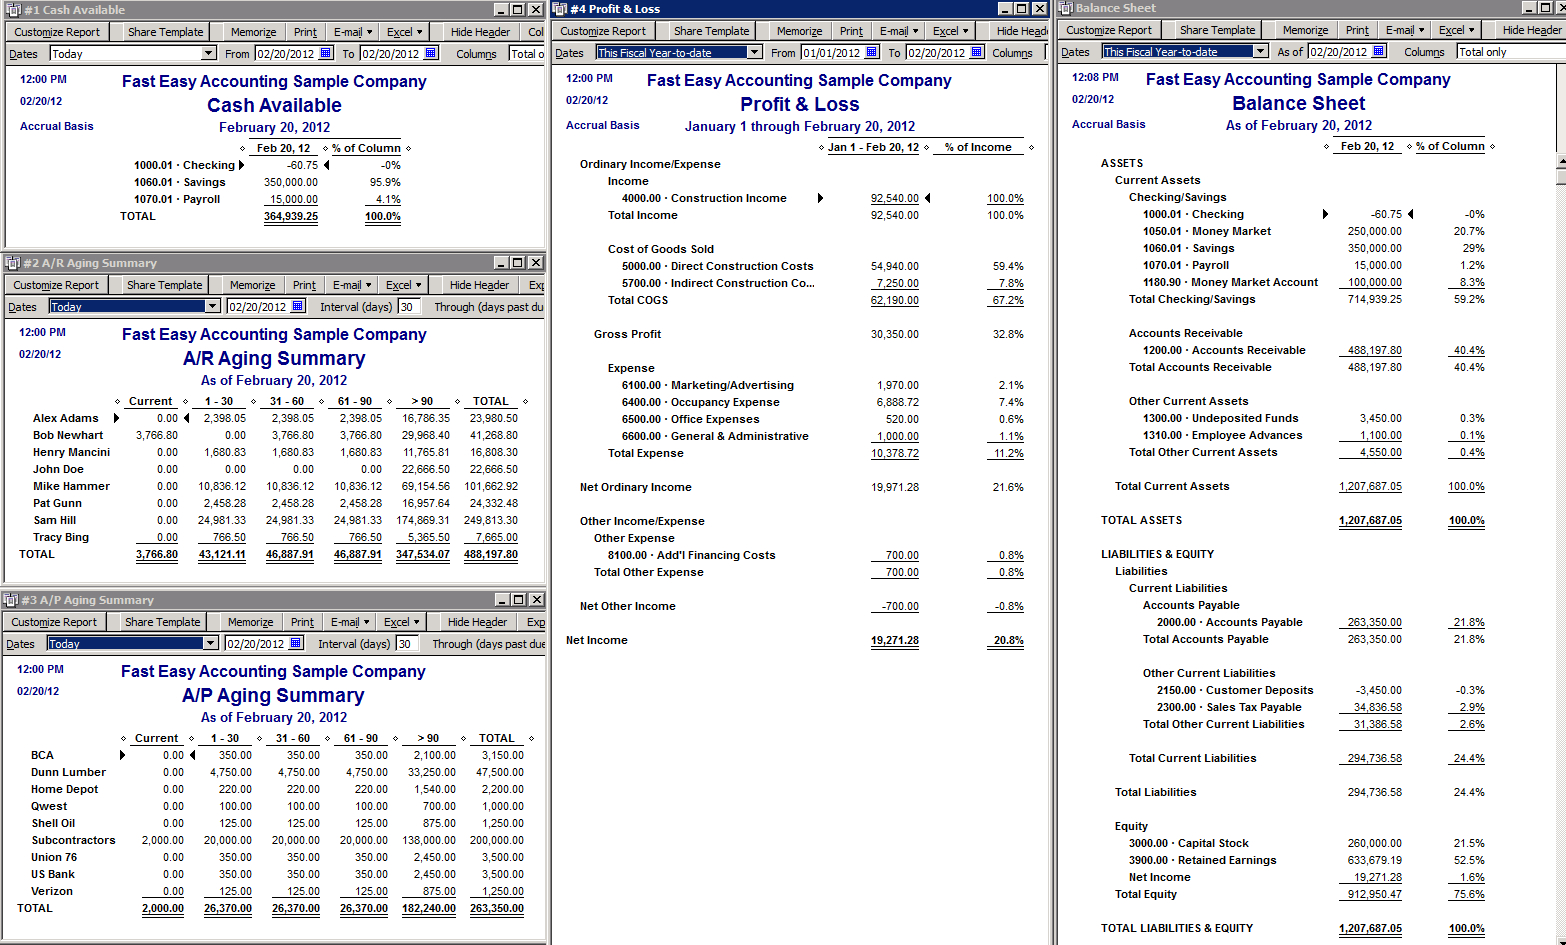 Quickbooks Balance Sheet Report With Quick Book Reports Templates